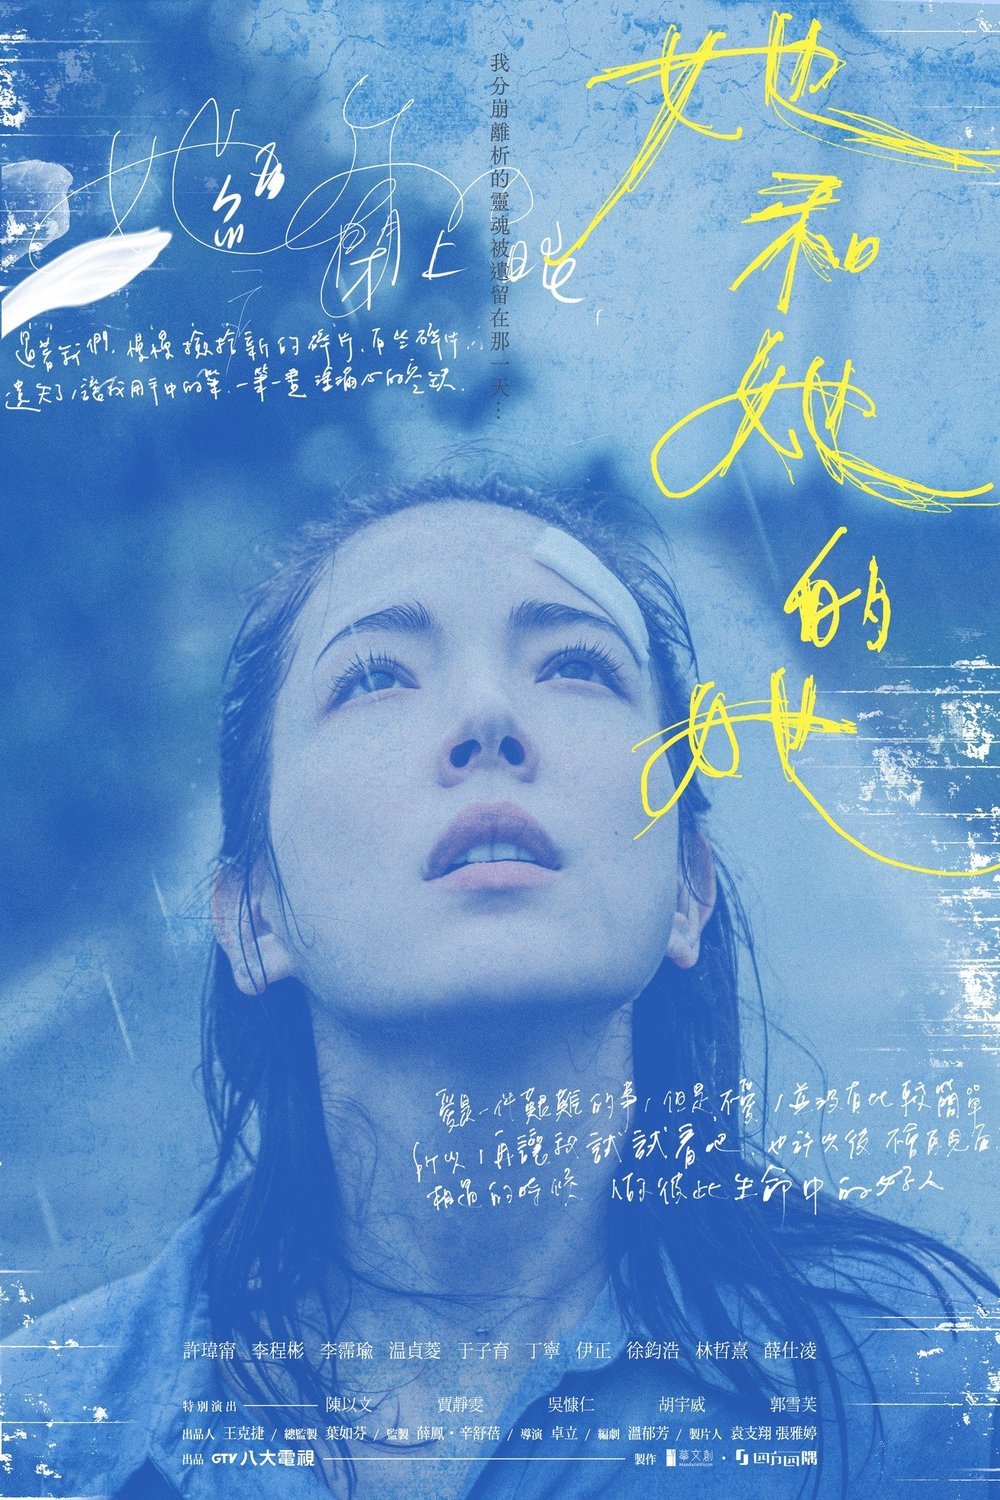 Mandarin poster of the movie Shards of Her